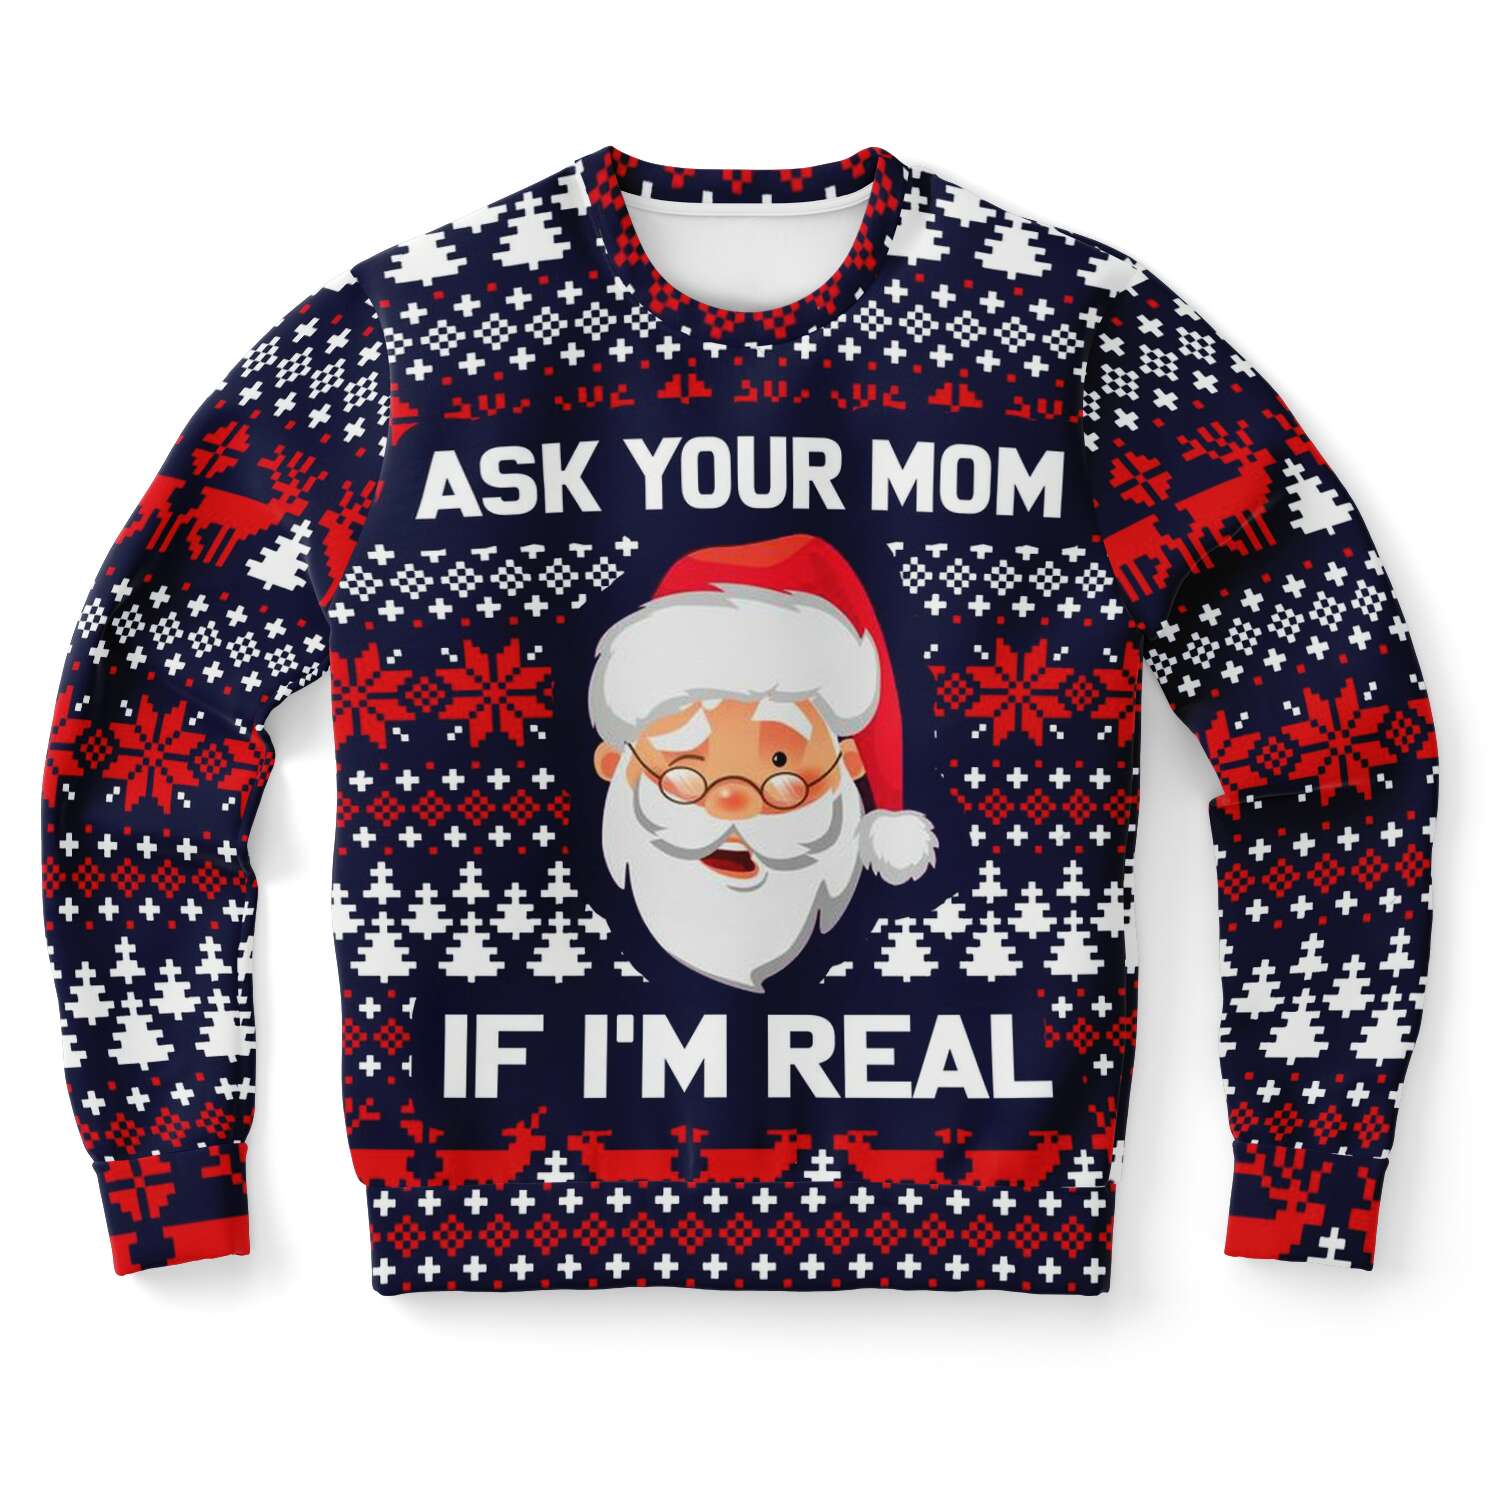 Your Mom Sweater